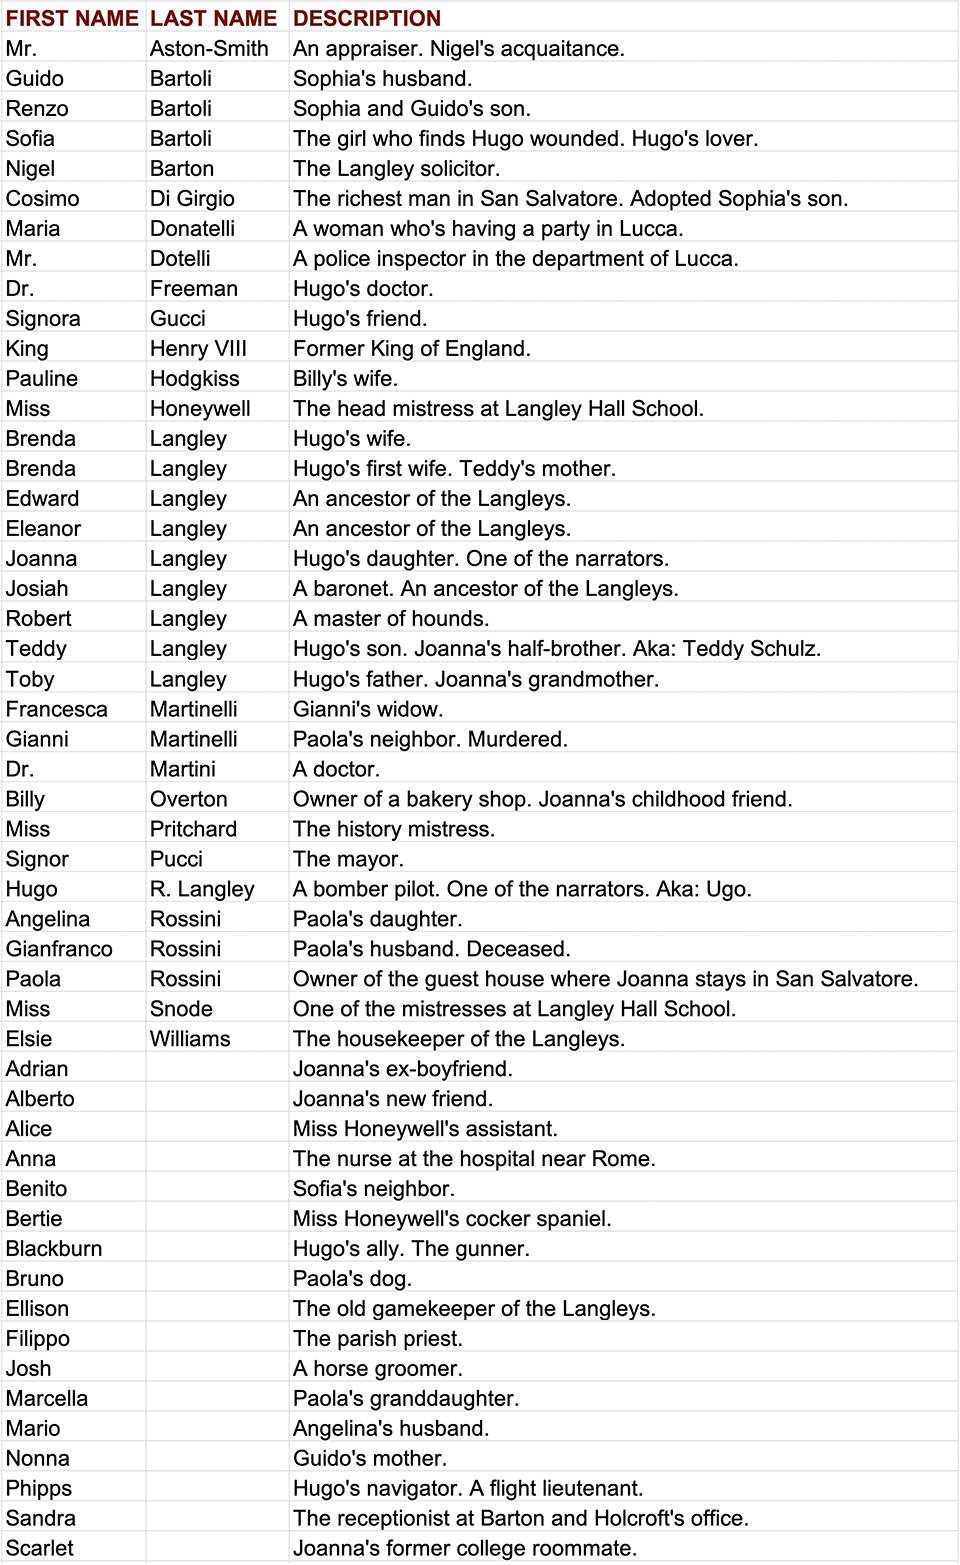 Alphabetical List of characters for The Tuscan Child